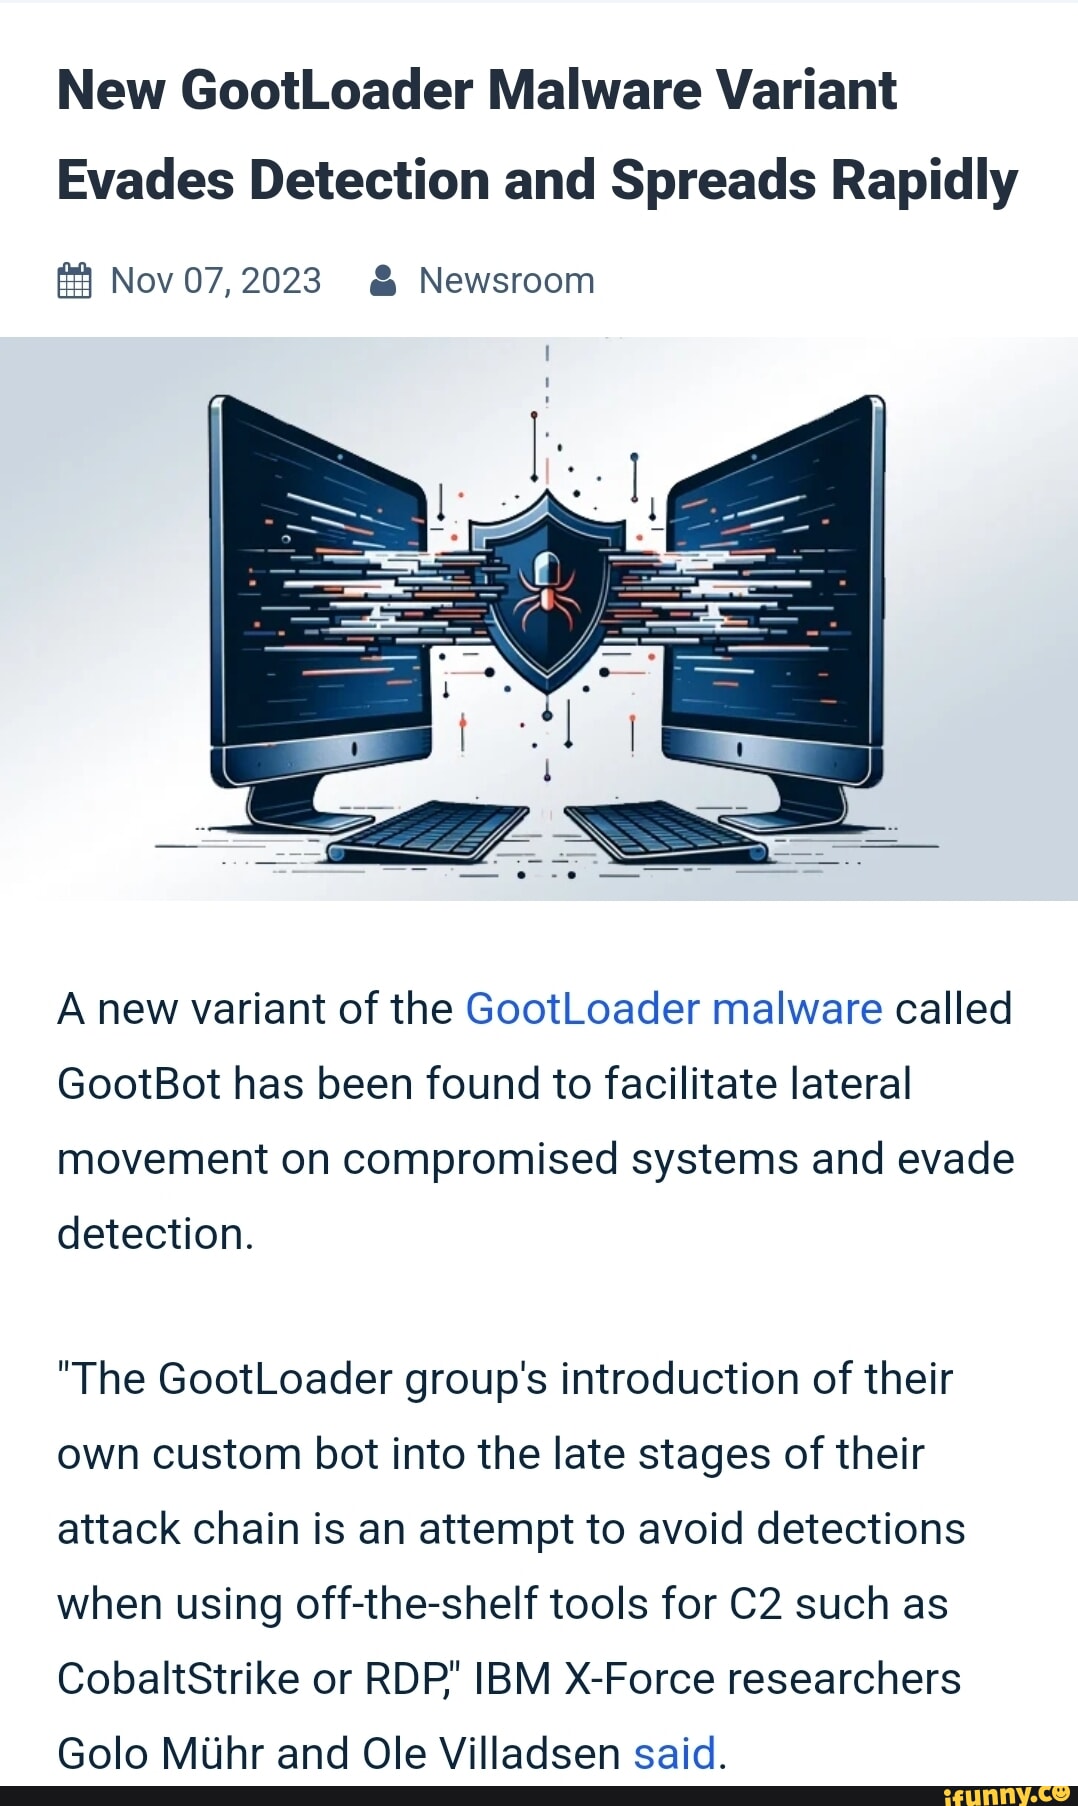 New GootLoader Malware Variant Evades Detection and Spreads Rapidly